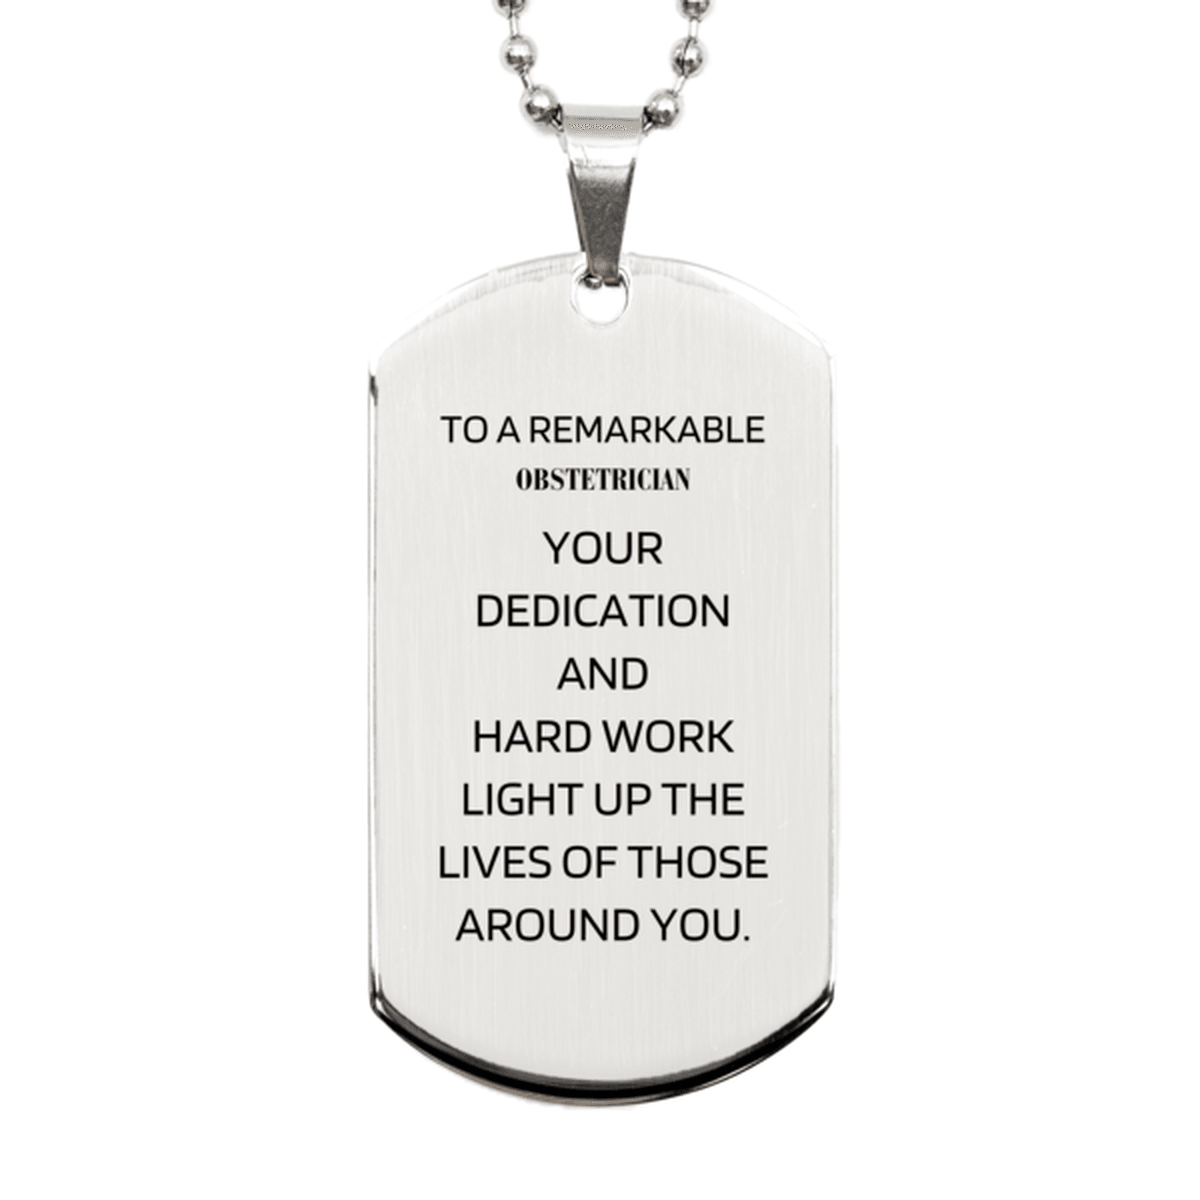 Remarkable Obstetrician Gifts, Your dedication and hard work, Inspirational Birthday Christmas Unique Silver Dog Tag For Obstetrician, Coworkers, Men, Women, Friends - Mallard Moon Gift Shop